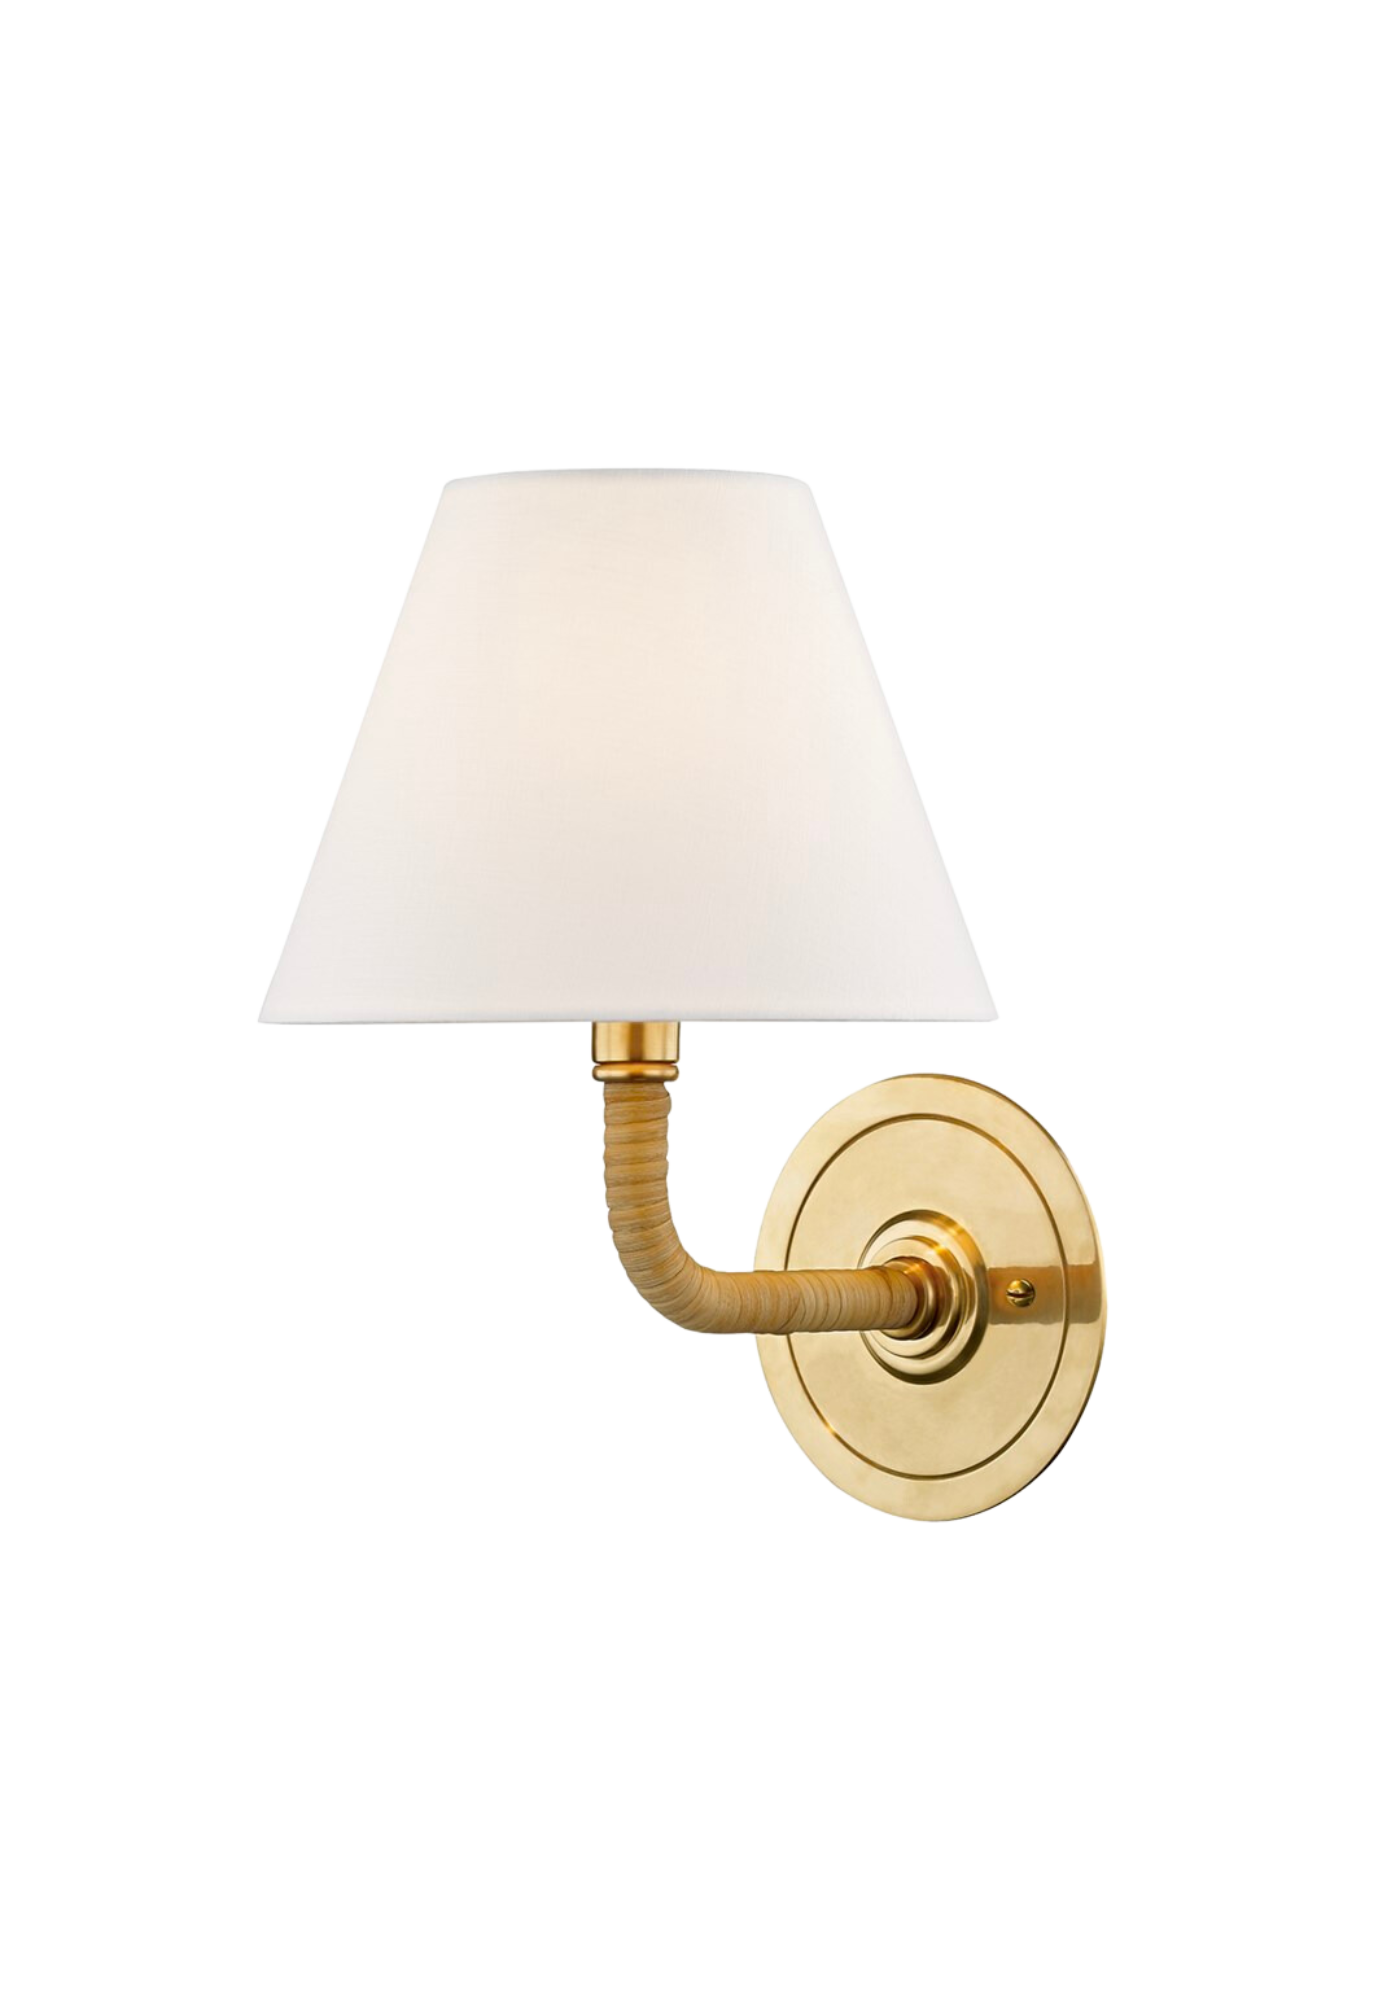 Vanoss Sconce By Mark D. Sikes